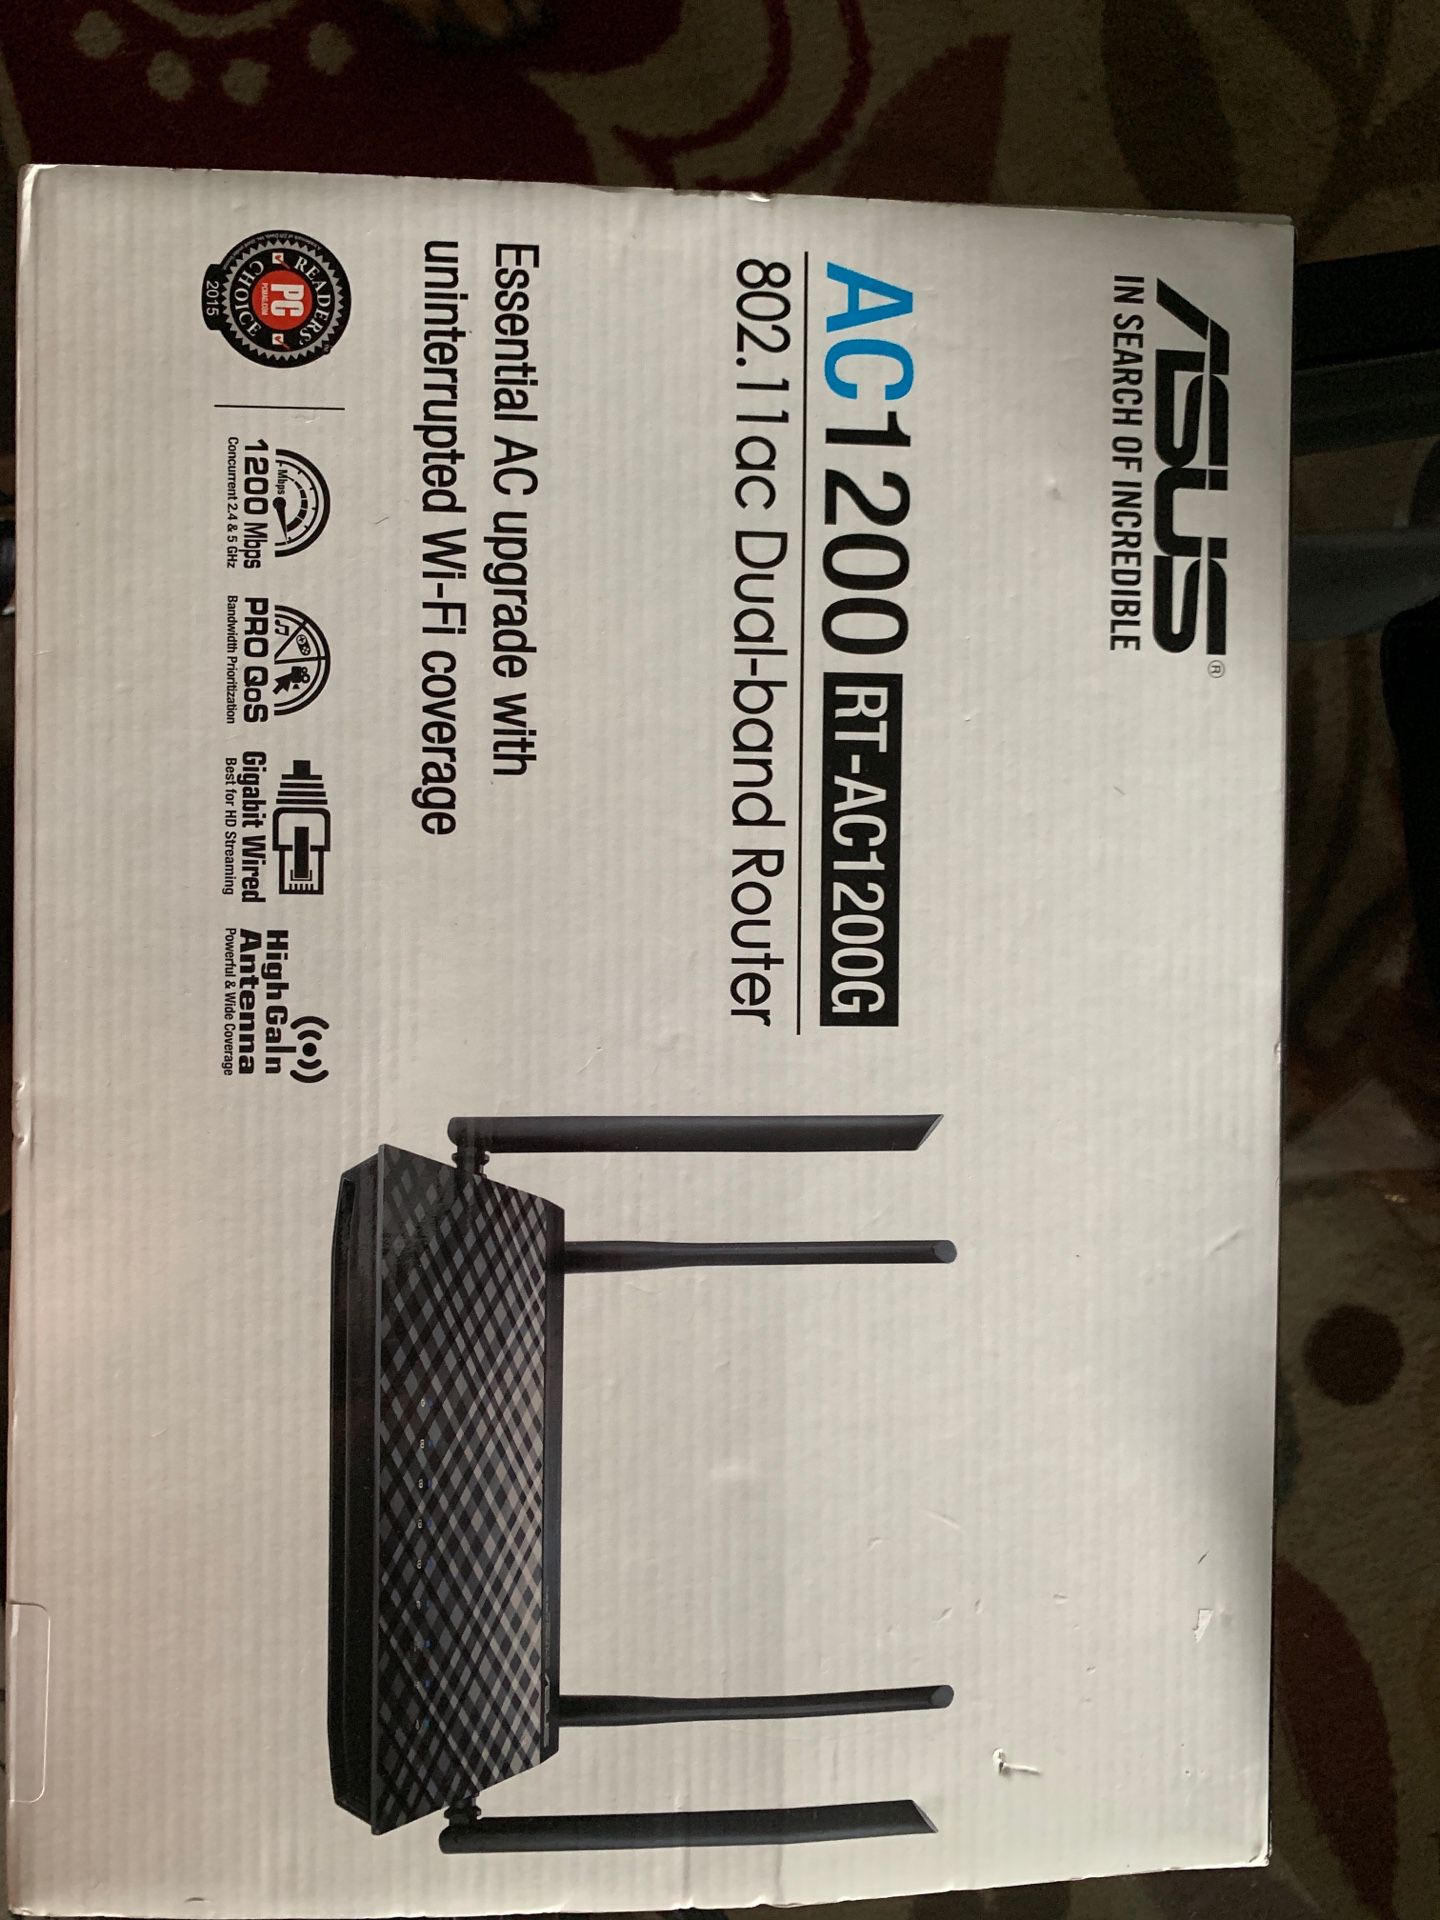 Asus Dual band router